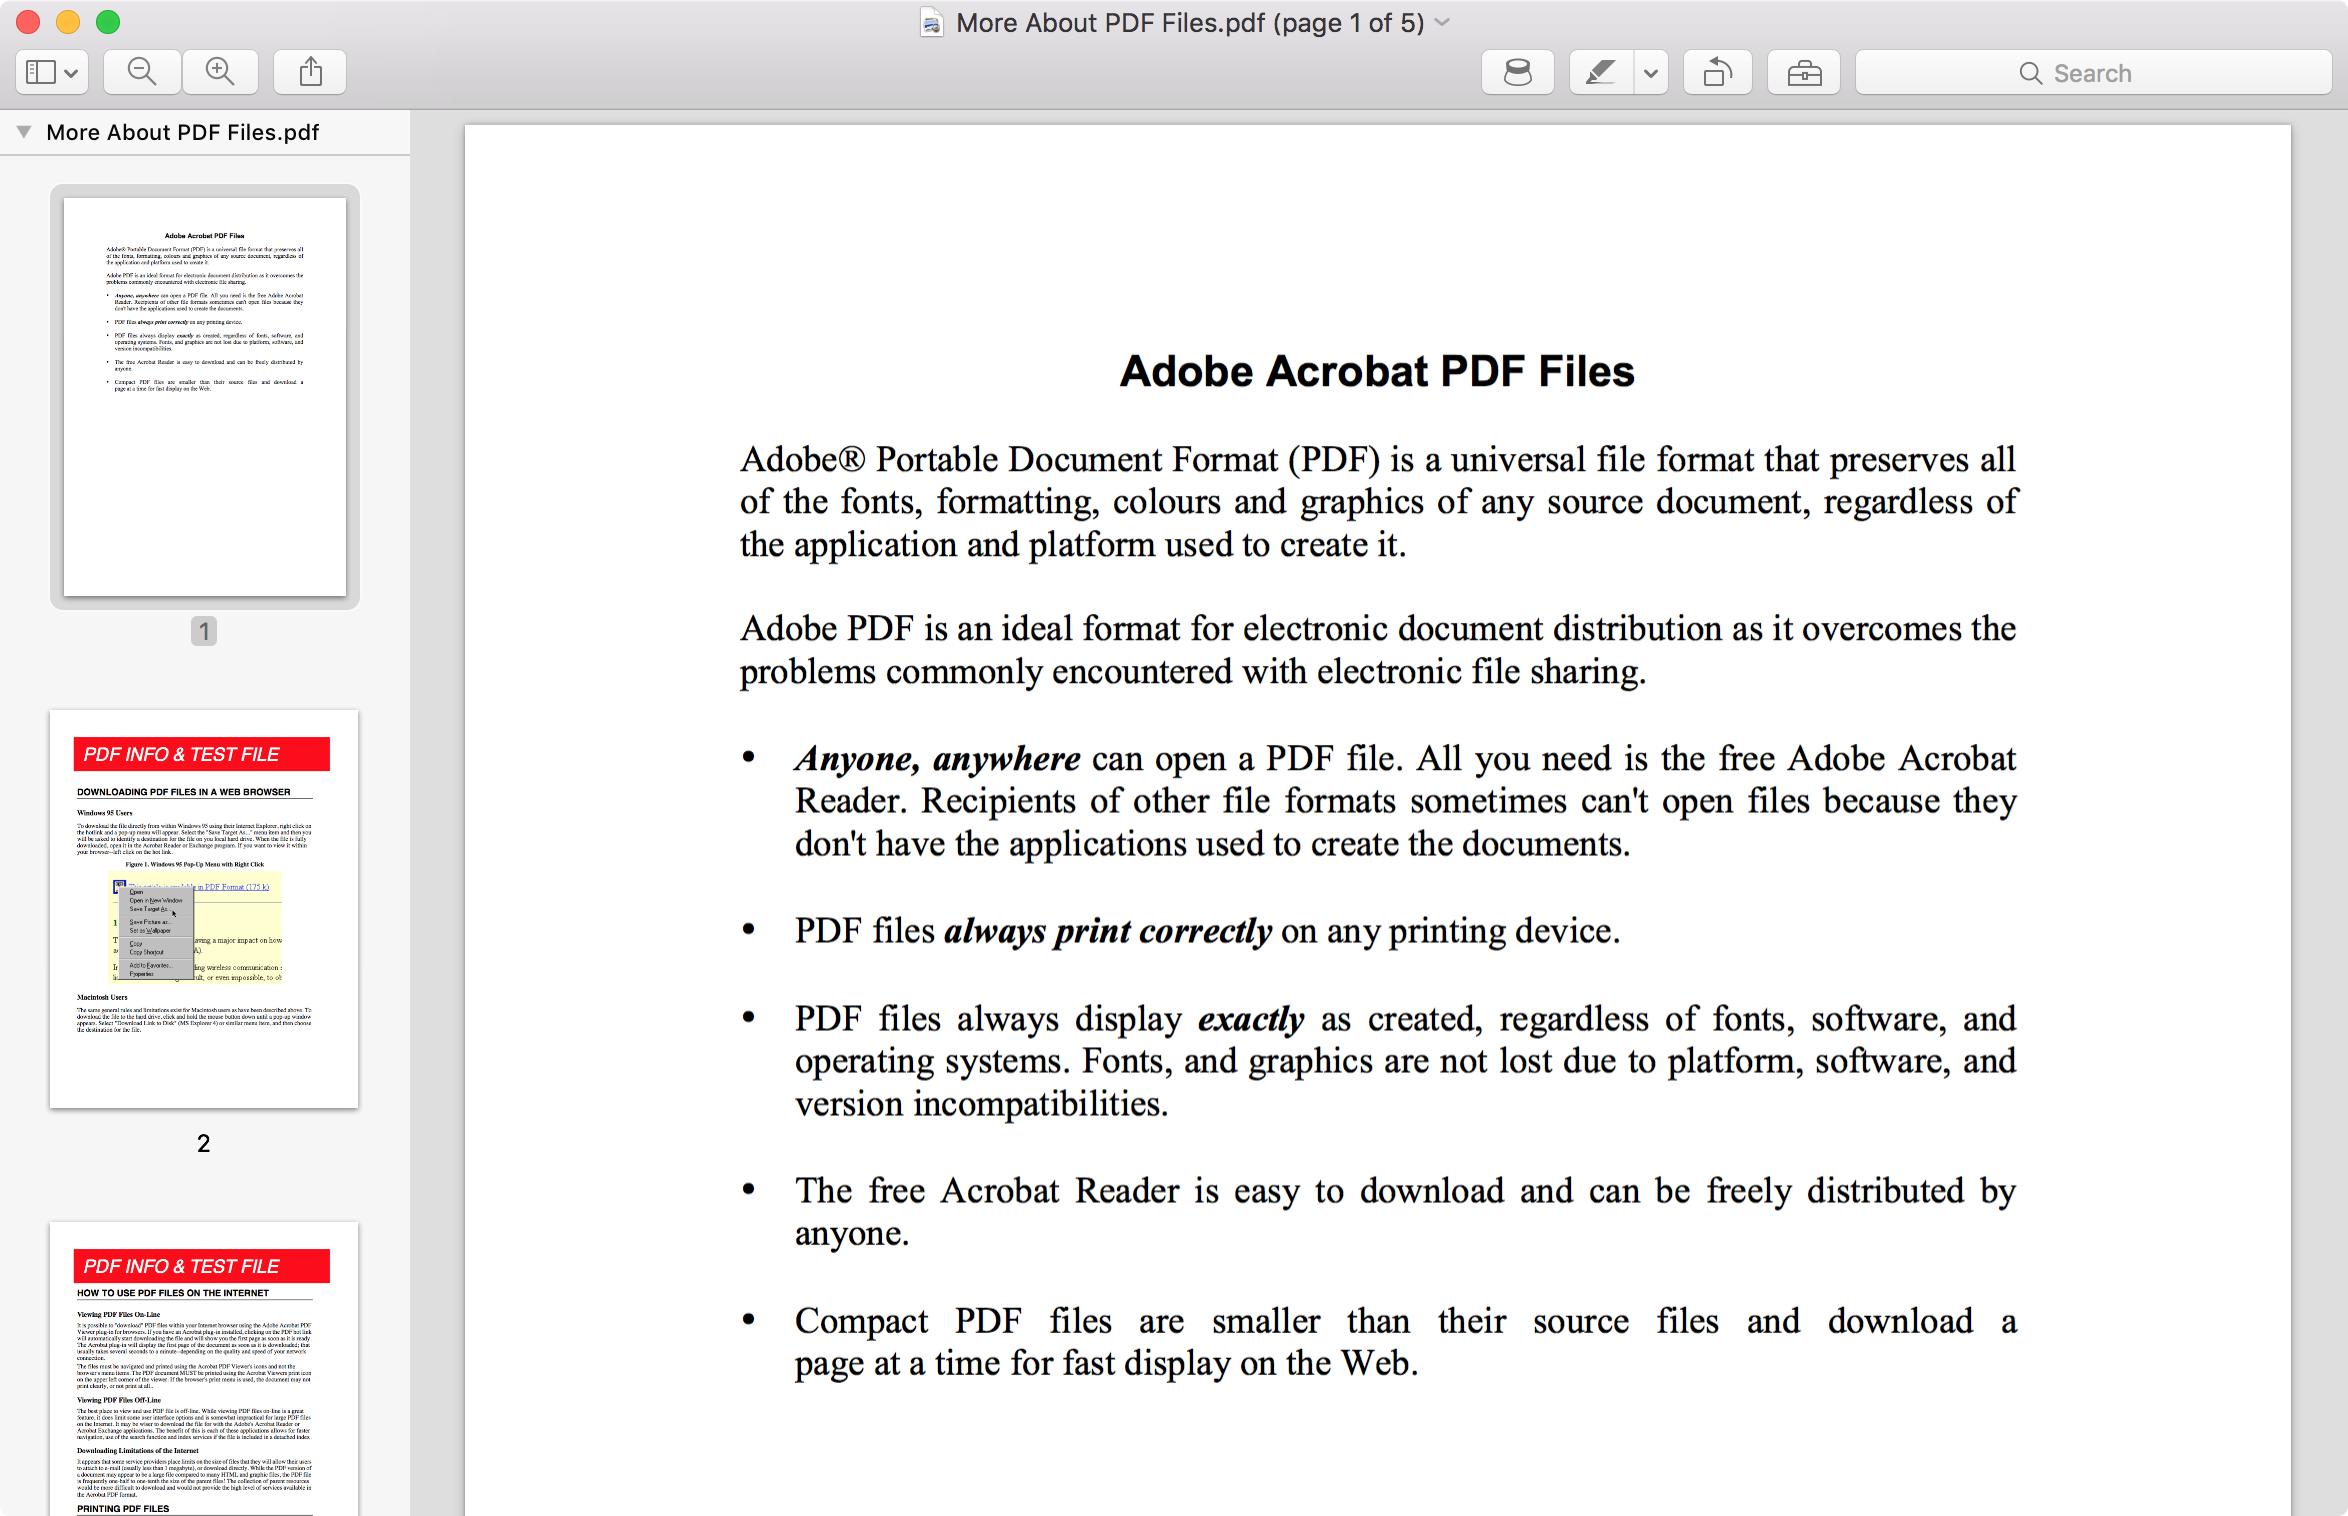 how to download one page from a pdf